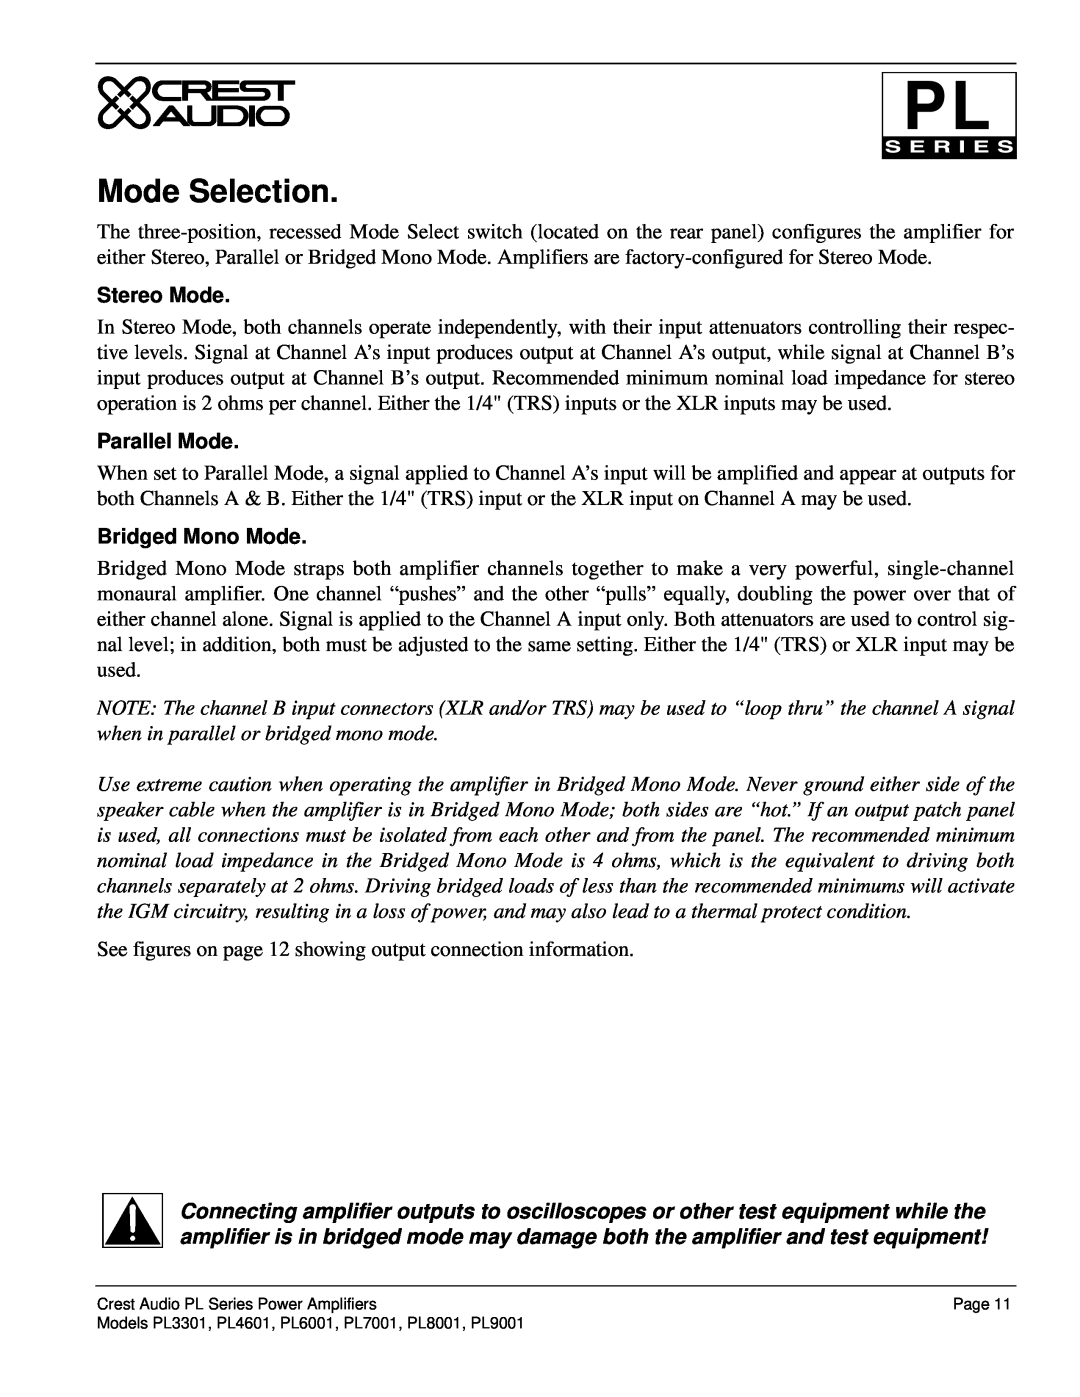 Peavey PL Series owner manual Mode Selection, Stereo Mode, Parallel Mode, Bridged Mono Mode 